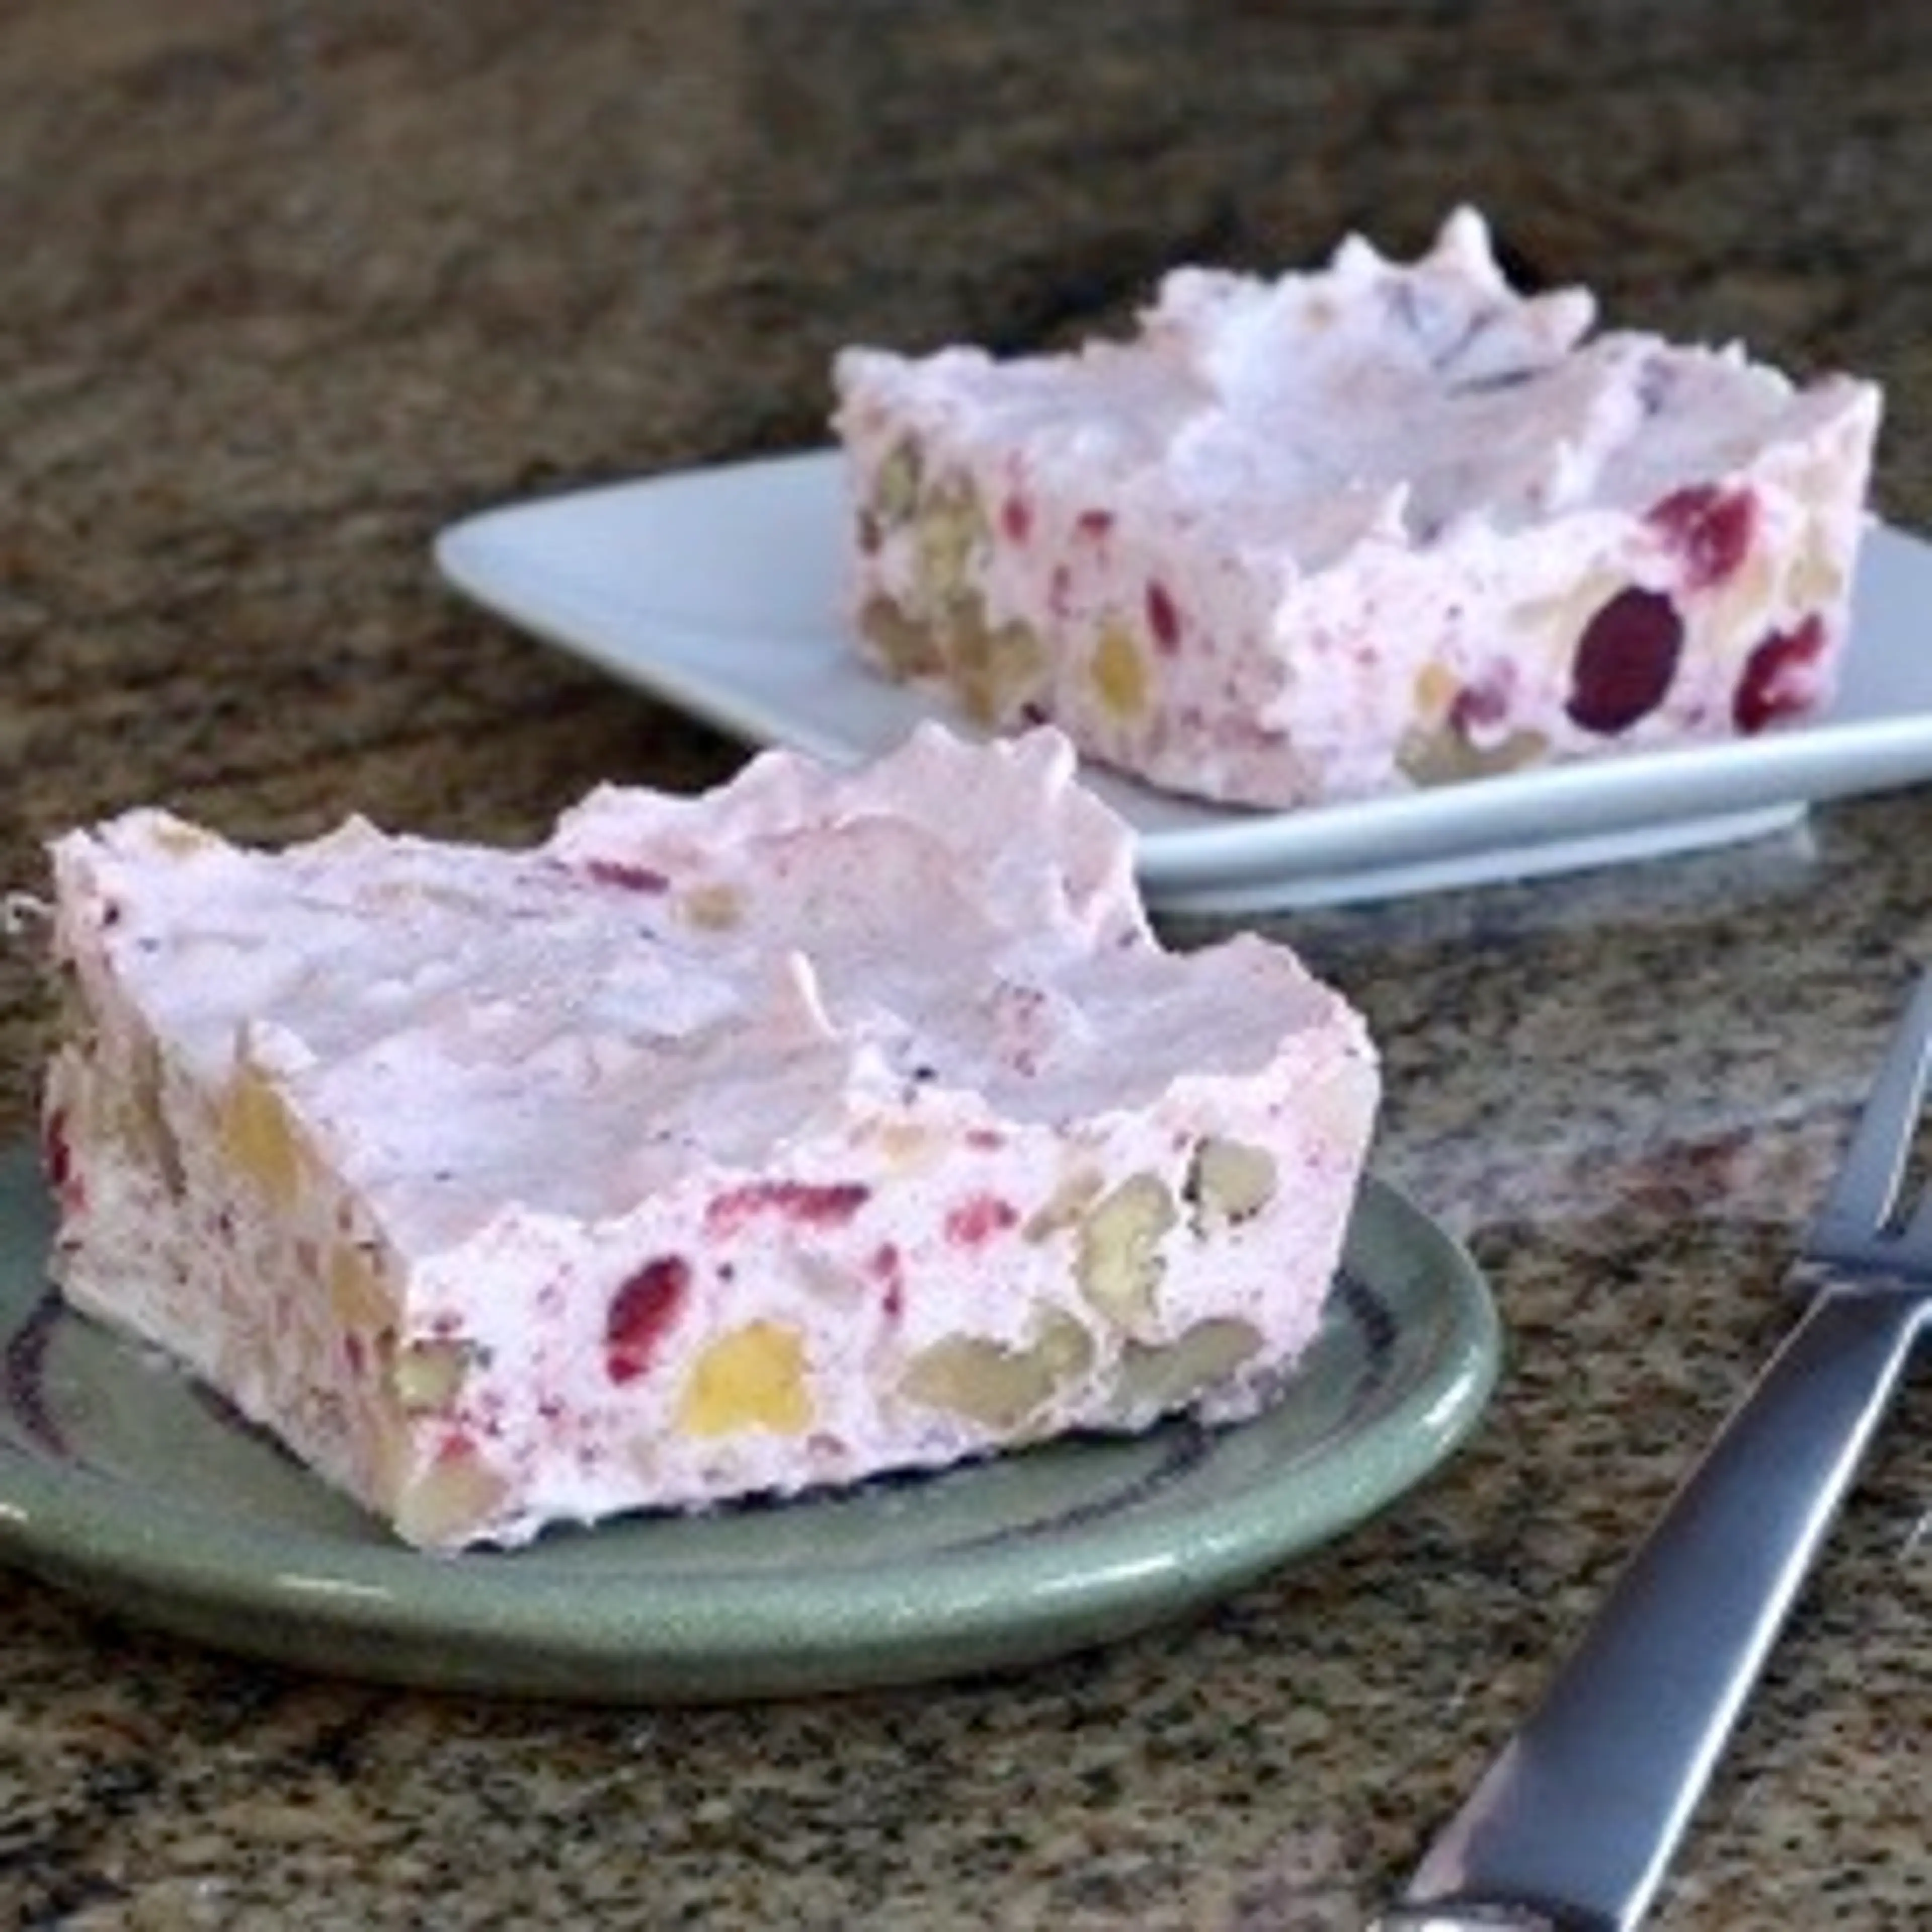 Frozen Pineapple and Cranberry Salad (Or Dessert)